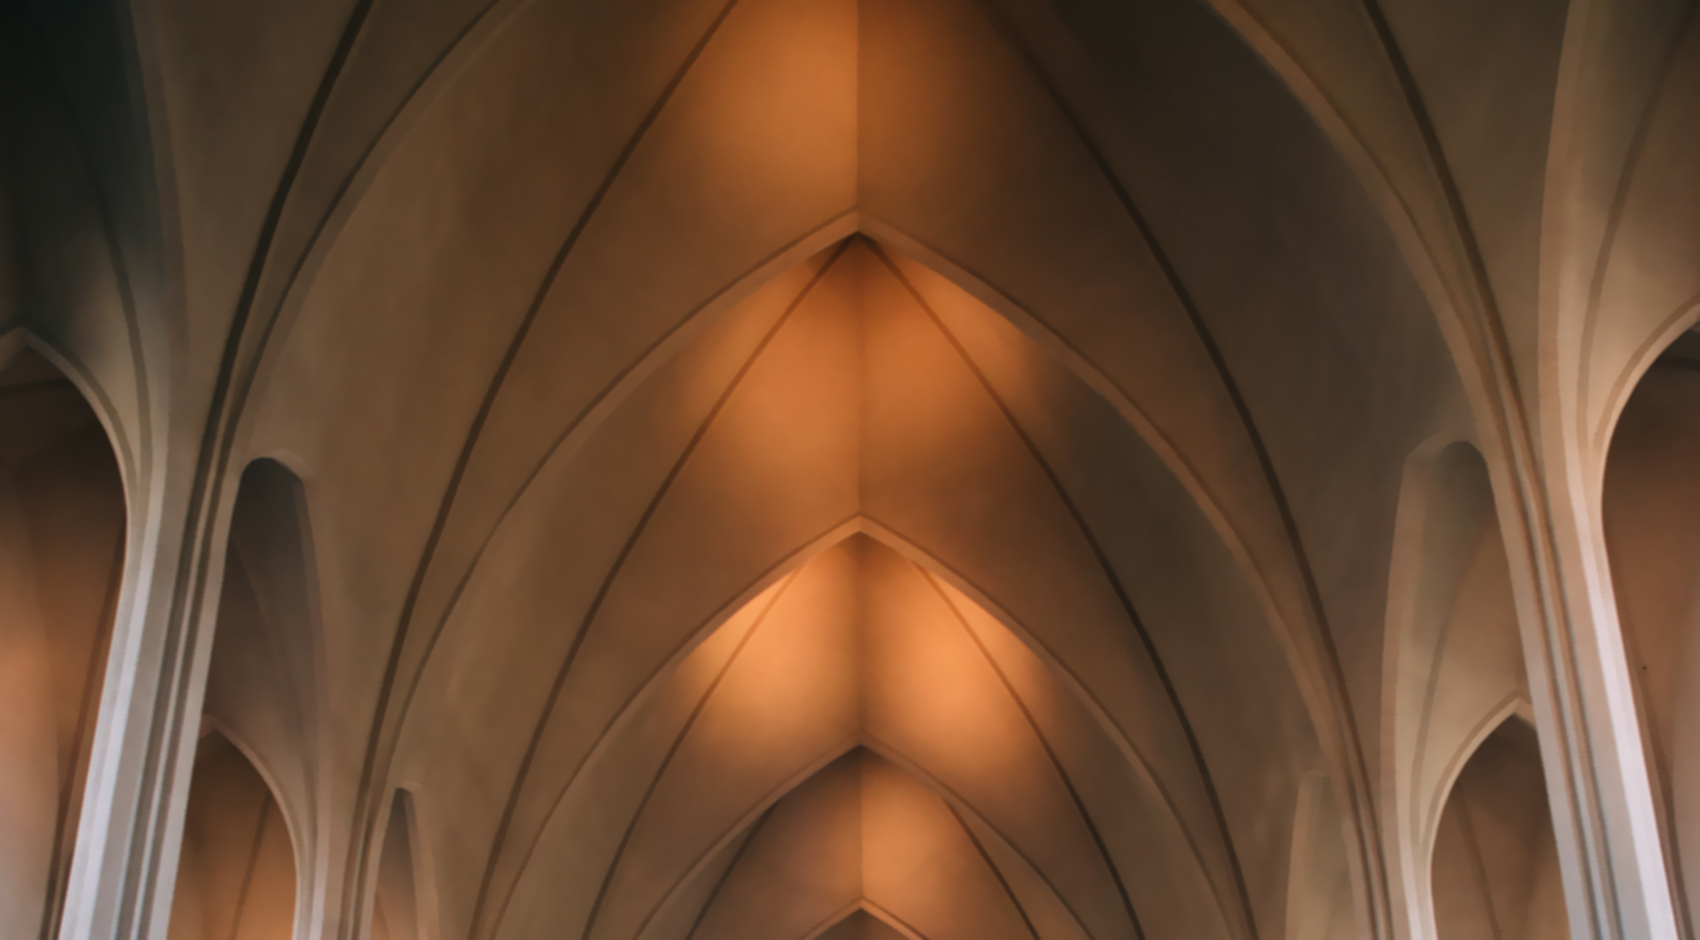 Beautifully designed high arches inside a building